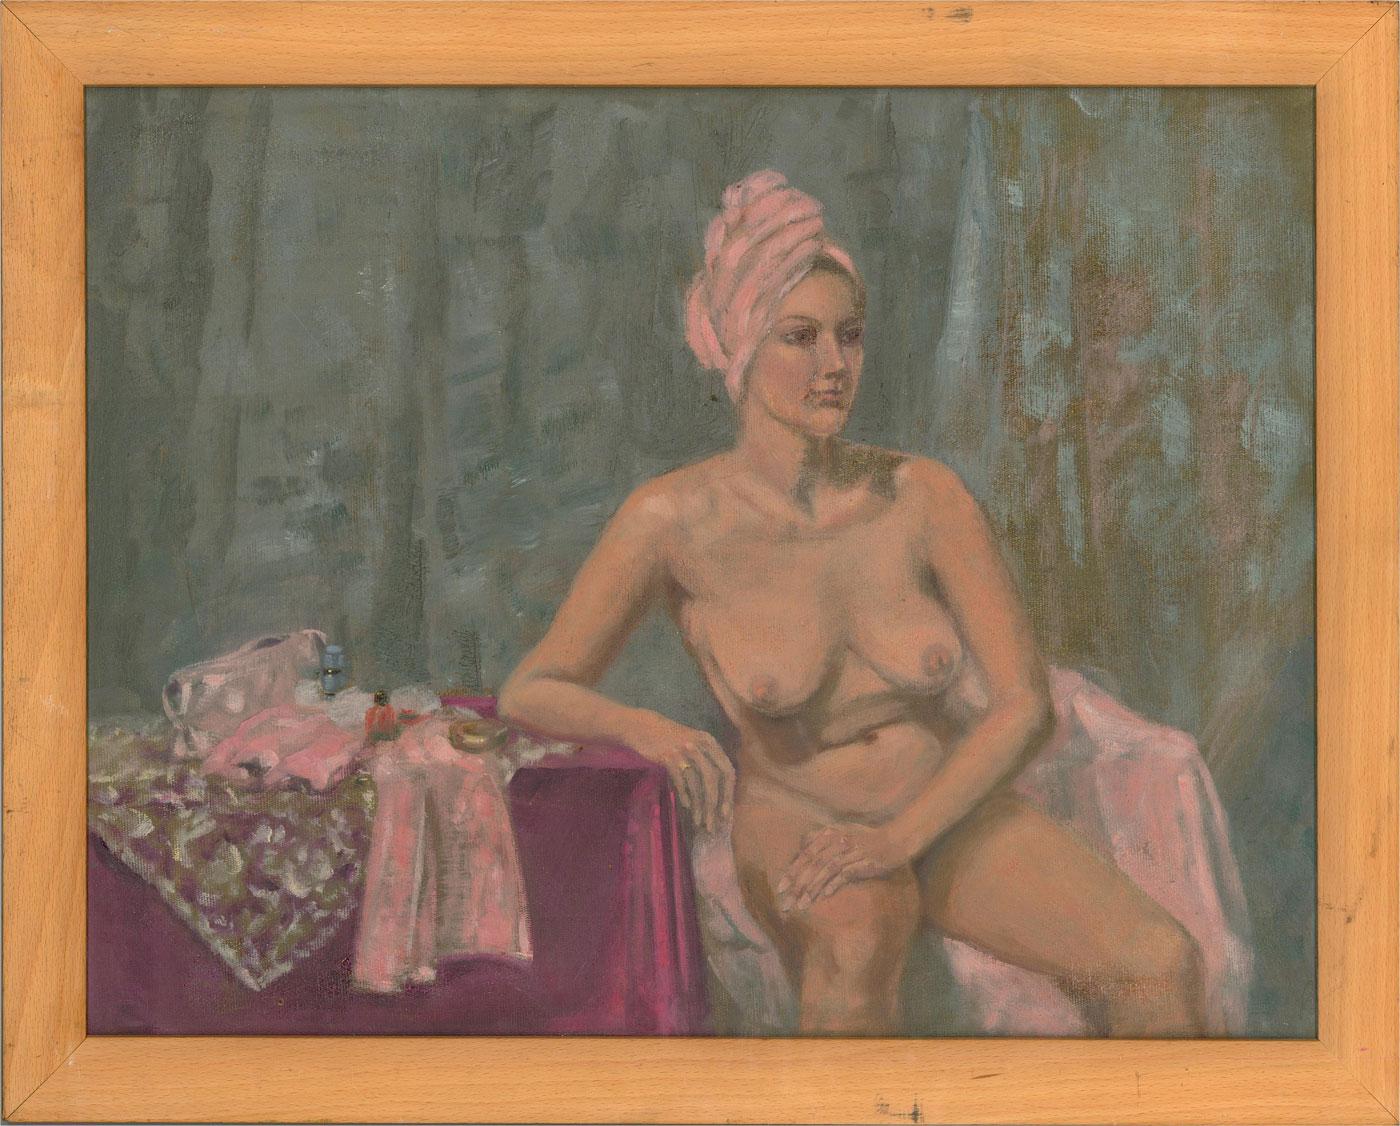 Unknown Nude Painting - Framed Contemporary Acrylic - Seated Nude